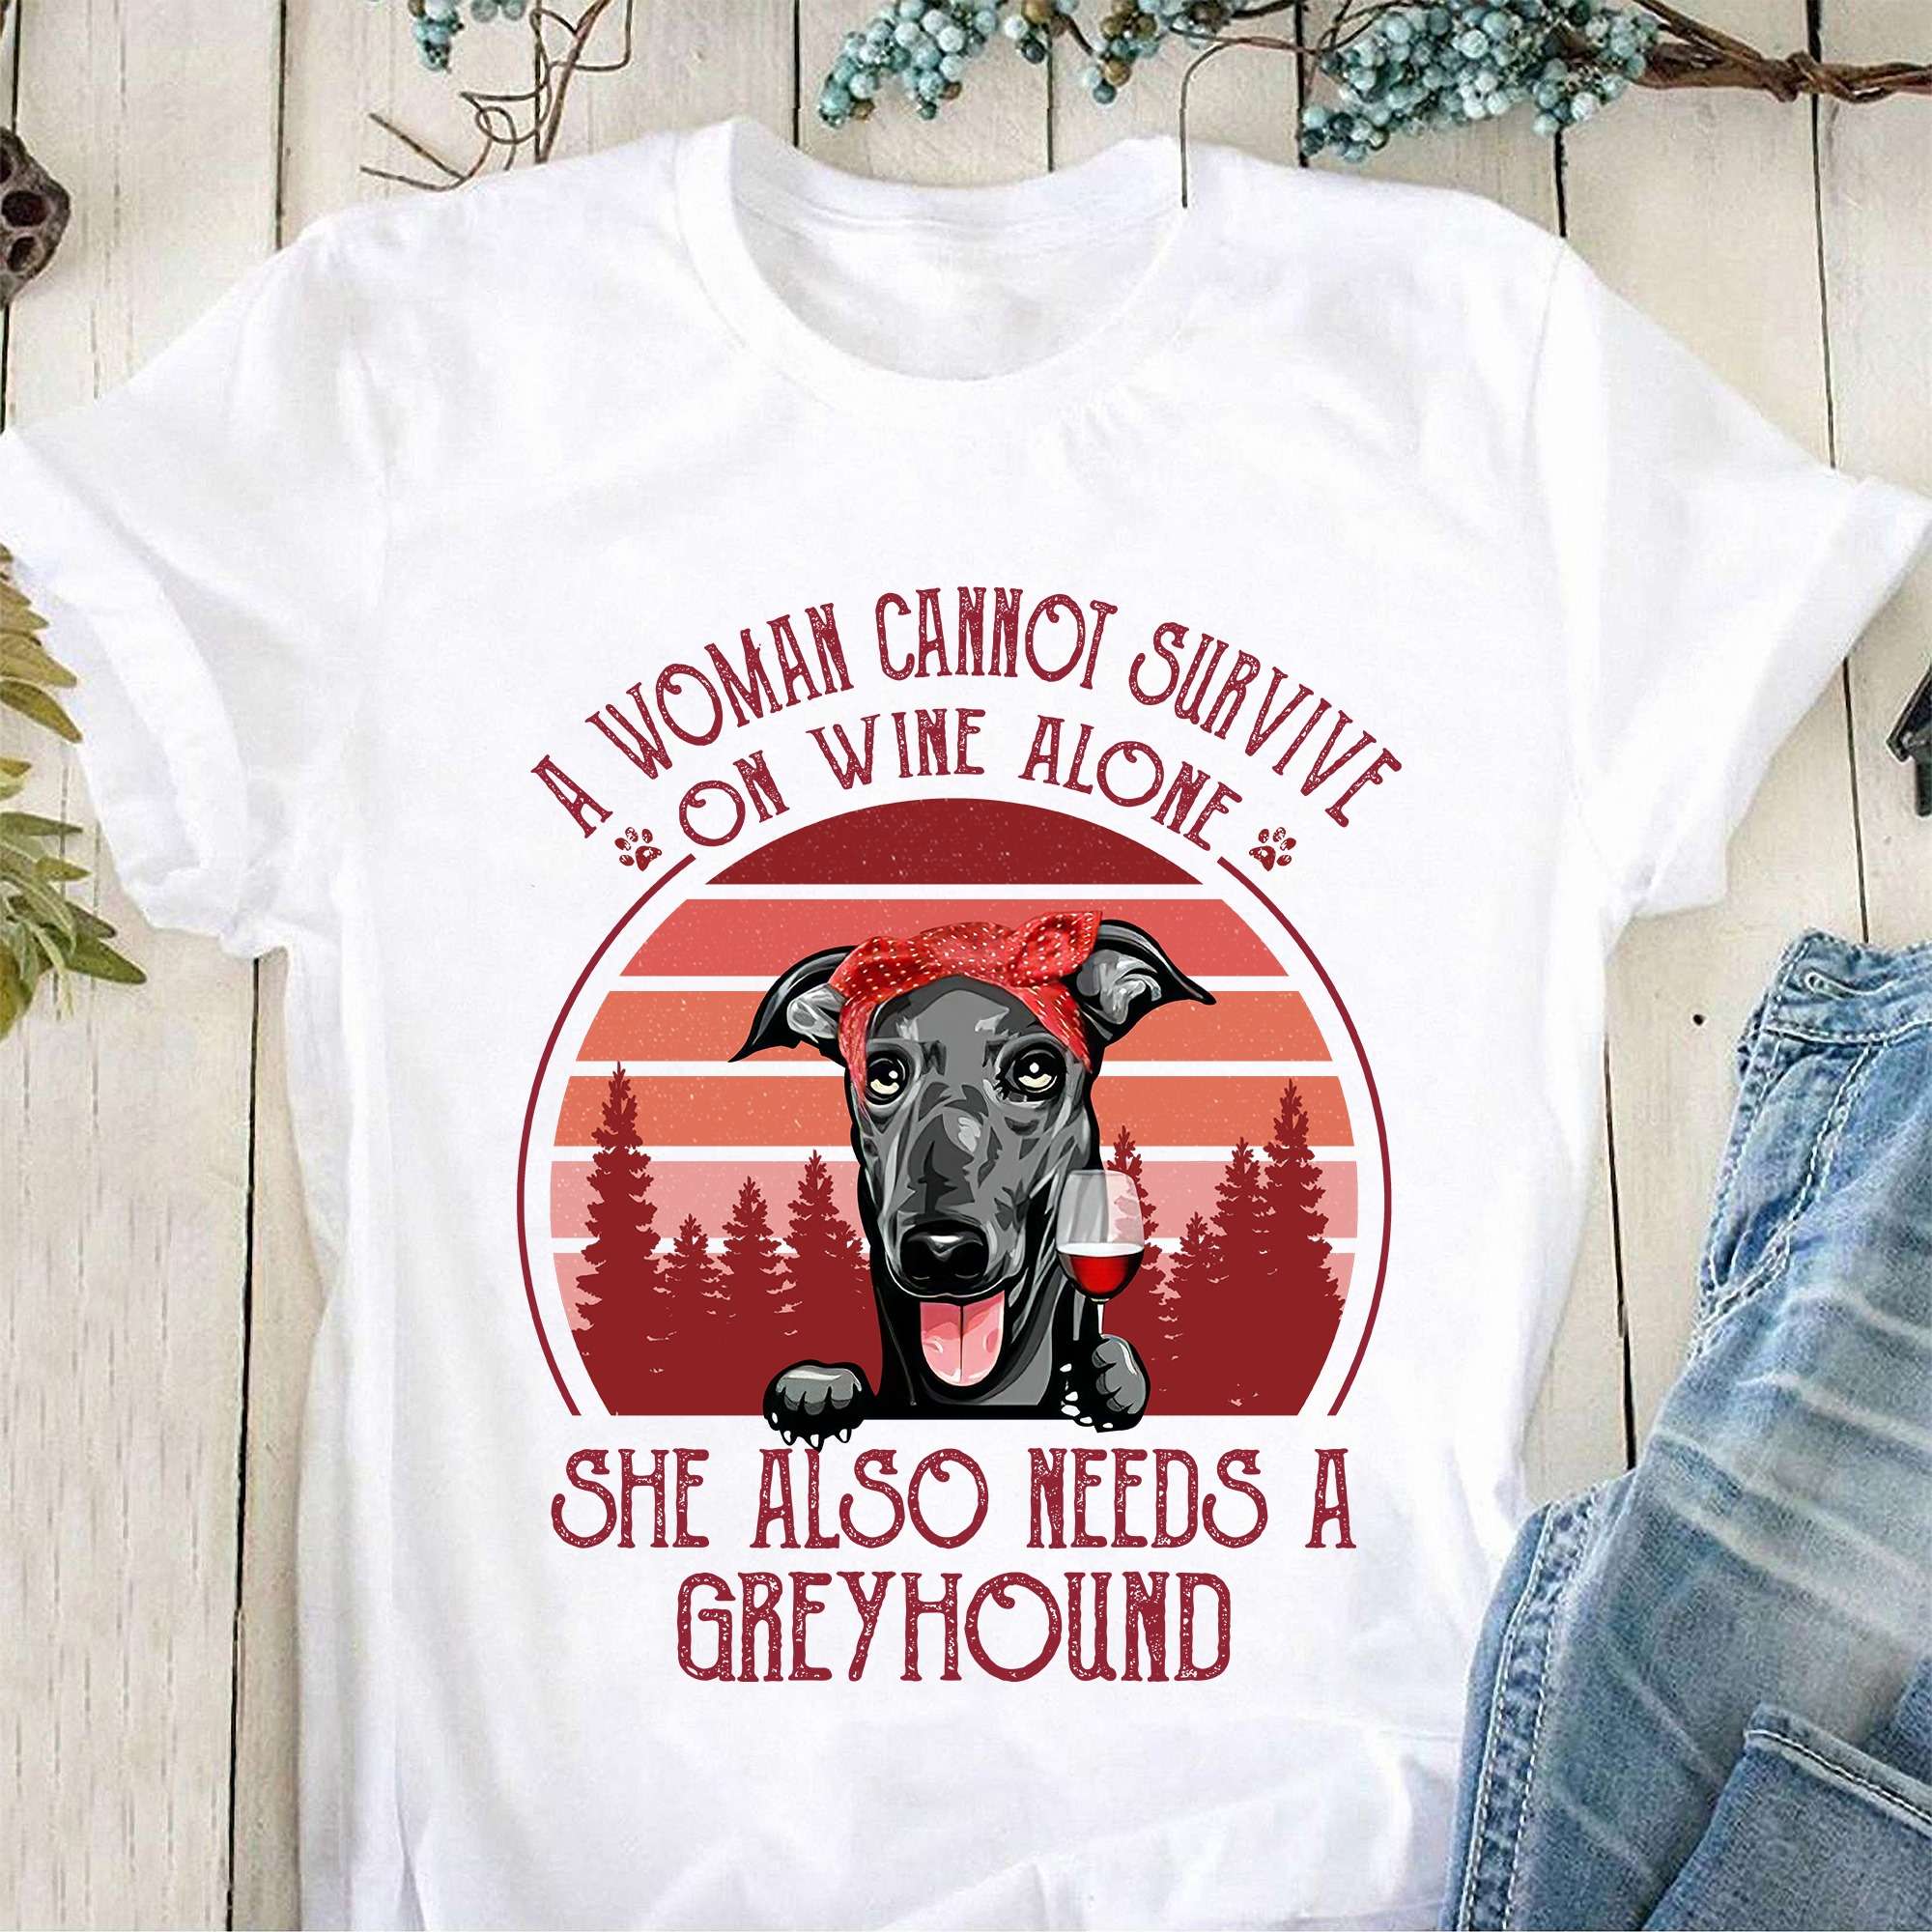 A woman cannot survive on wine alone she also needs a Greyhound - Greyhound and wine, Greyhound funny T-shirt